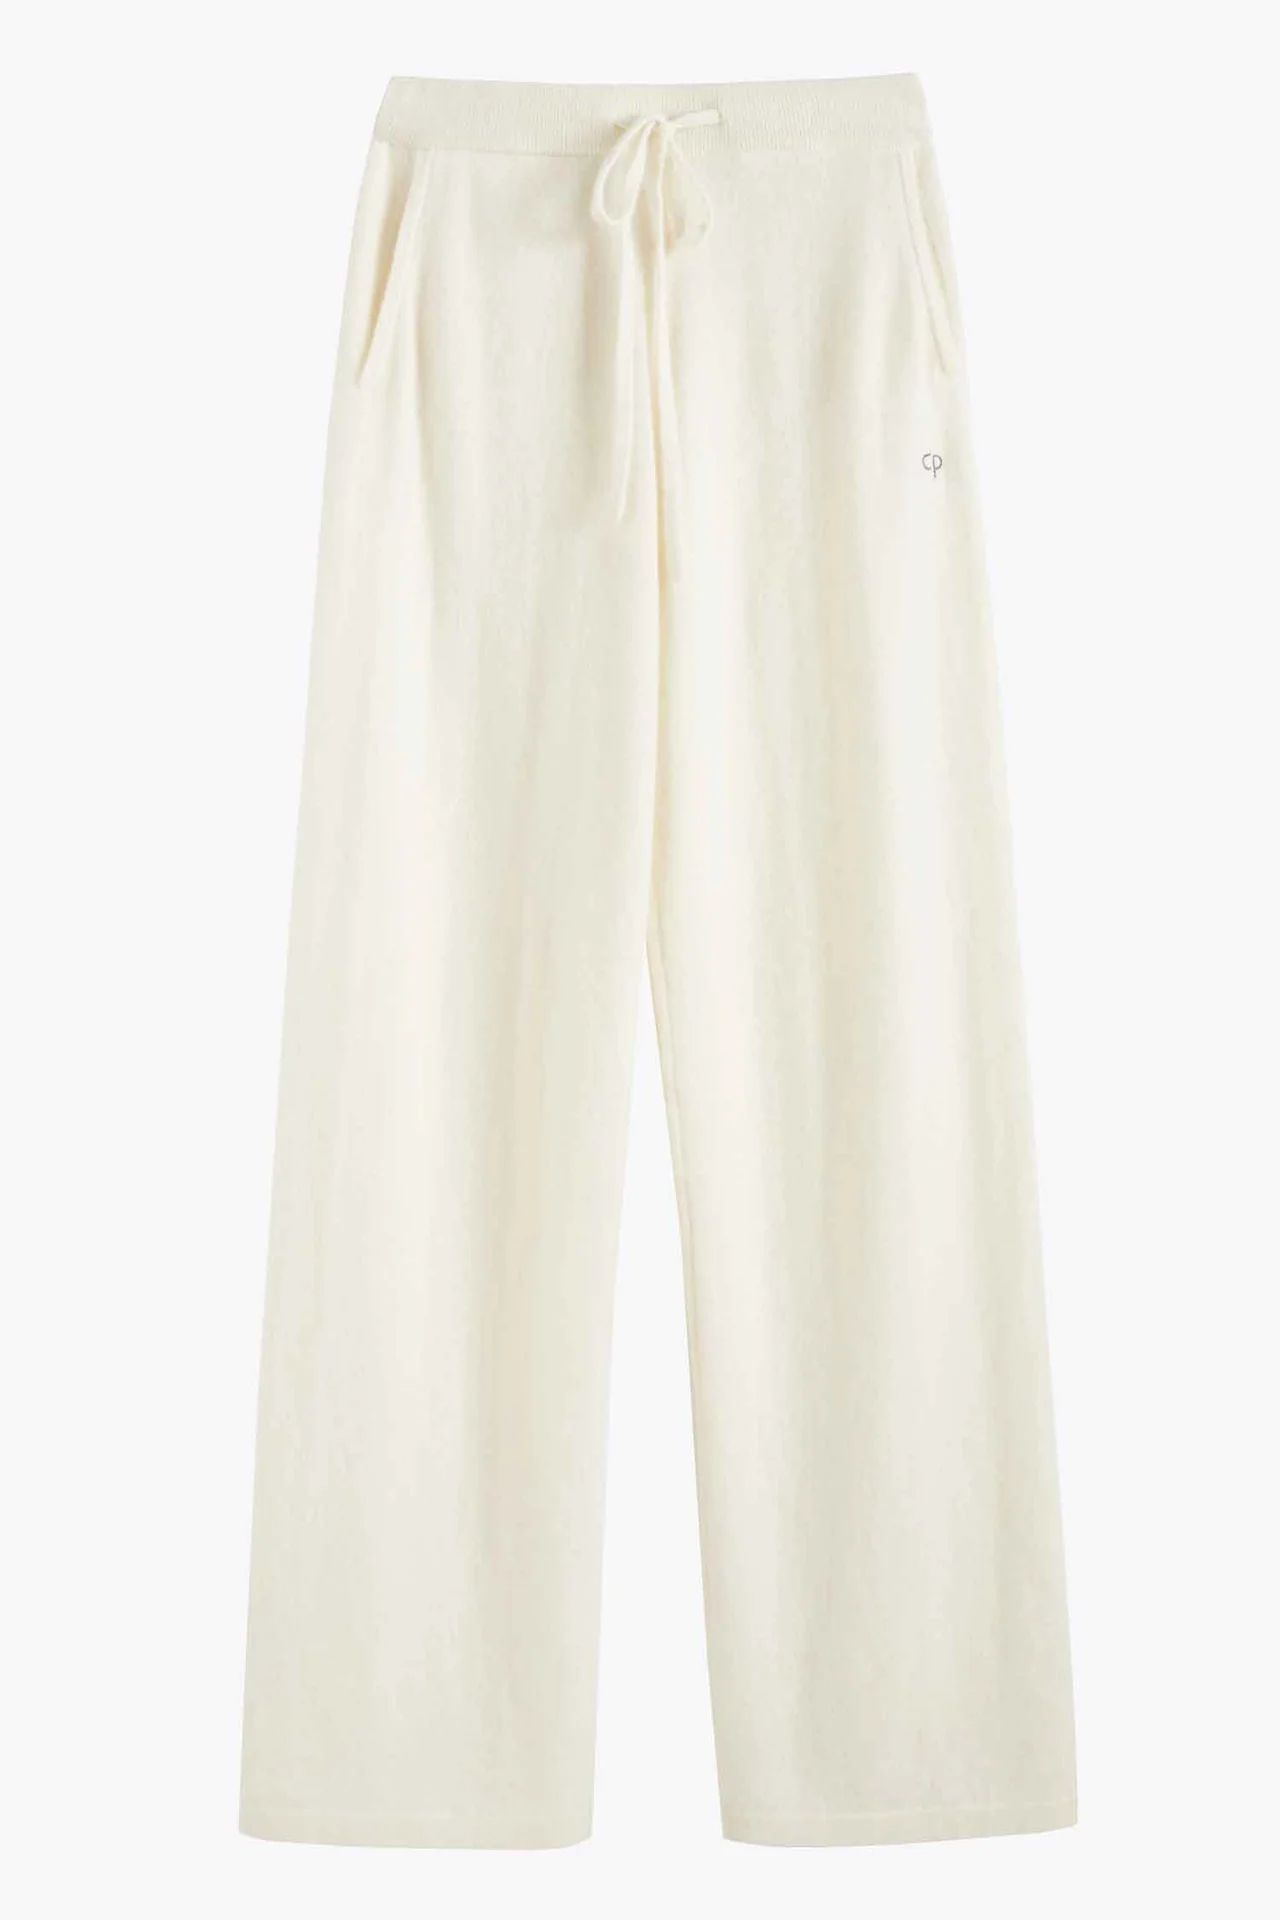 Cream Cashmere Wide-Leg Pants | Chinti and Parker